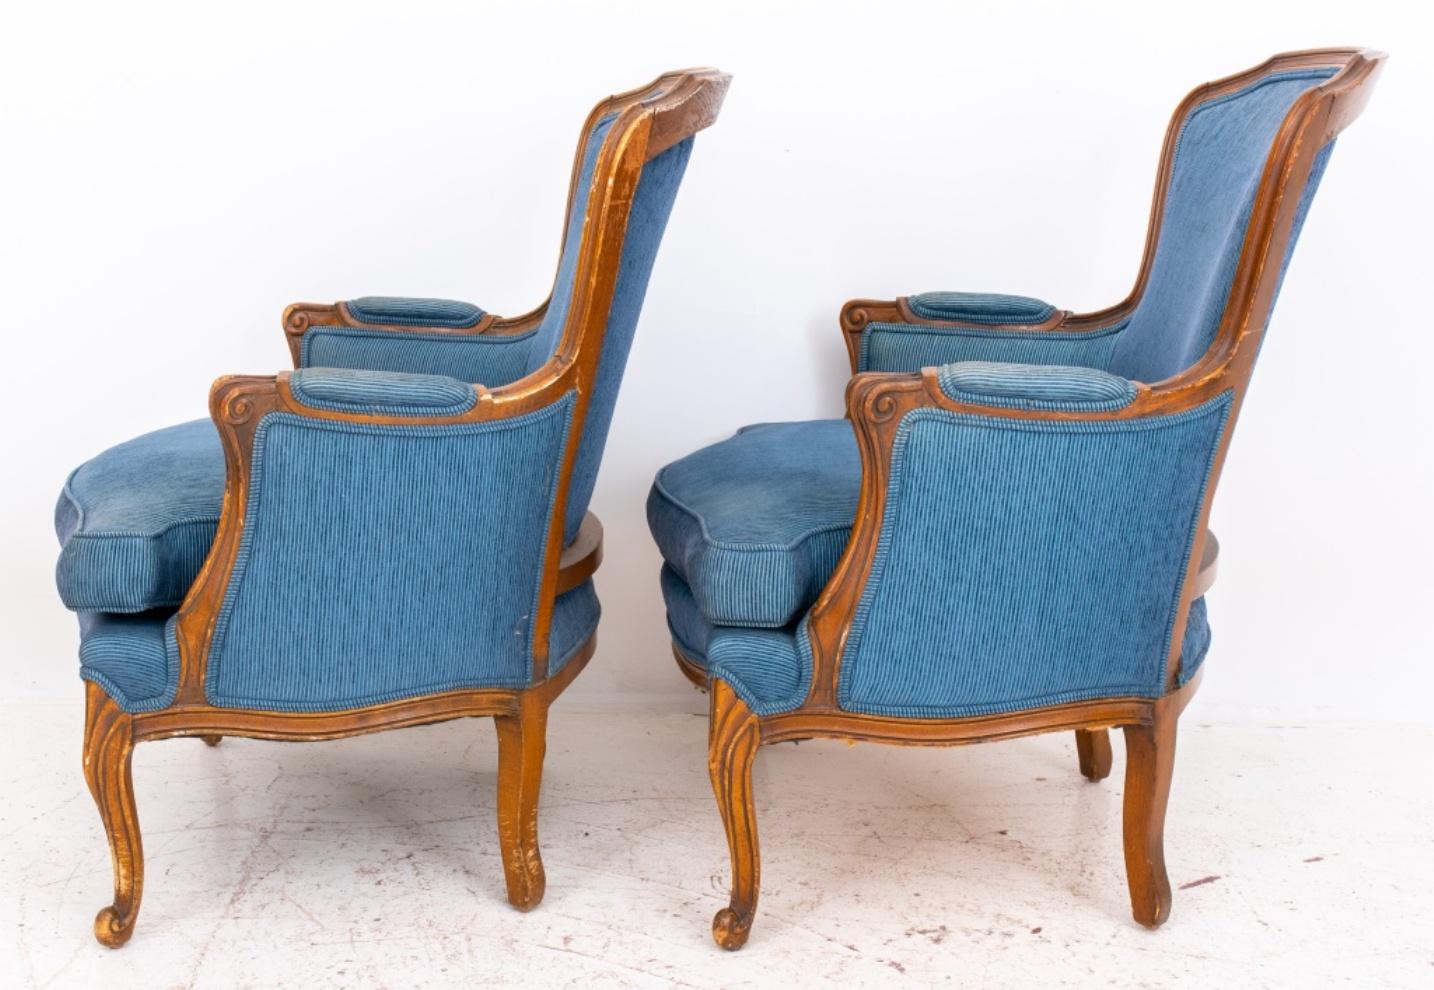 French provincial style upholstered arm chairs or bergeres, with a shaped molded crestrail above an upholstered back en cabriolet, the back, sides, and seat now upholstered in a blue corduroy, on shaped seat above cabriole legs. Measures: 34.5